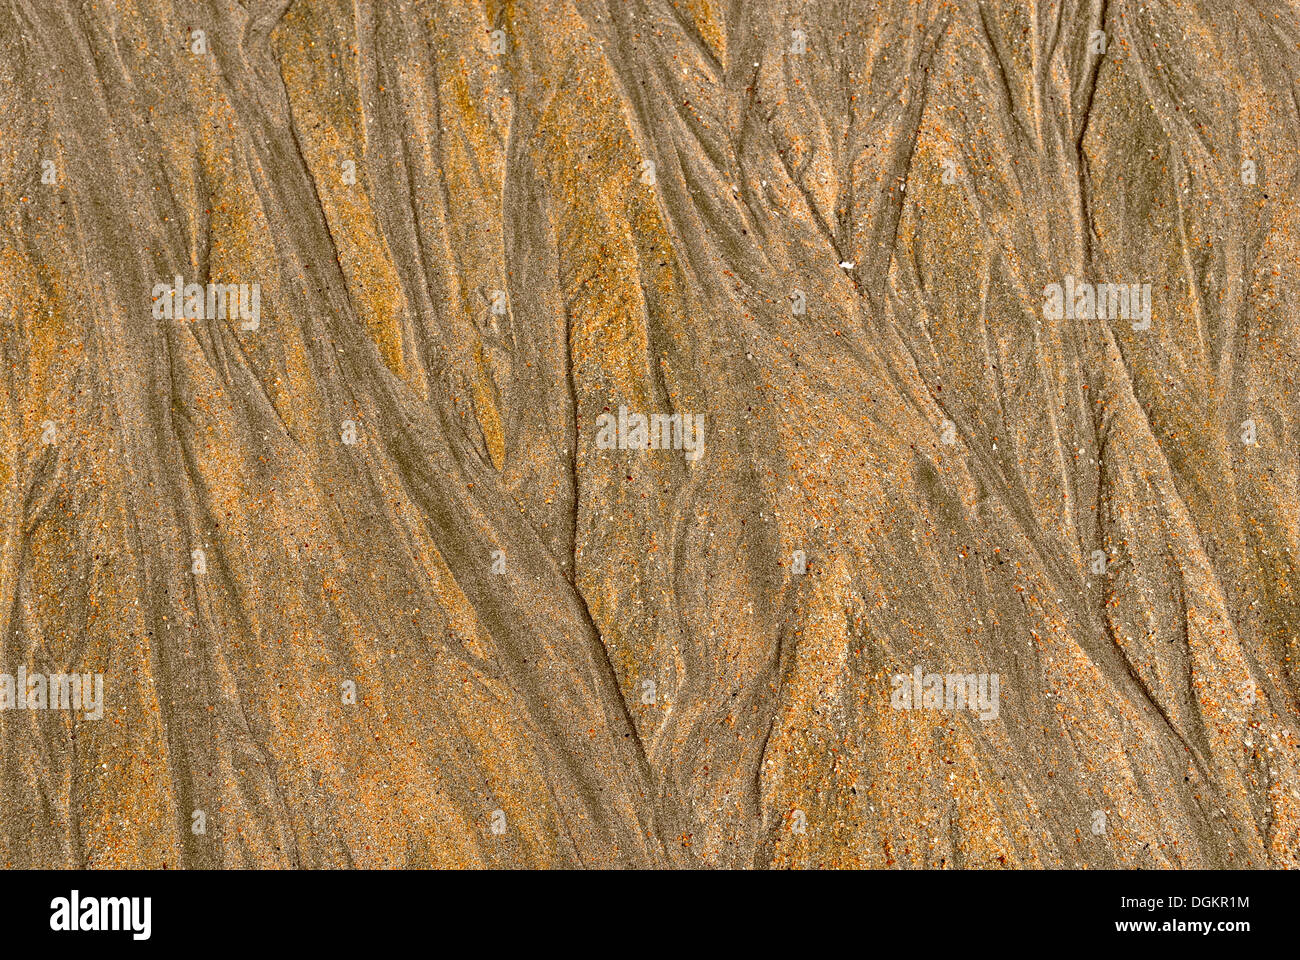 Sand structure at low tide, Balding Bay, northern coast, Magnetic Island, Queensland, Australia Stock Photo